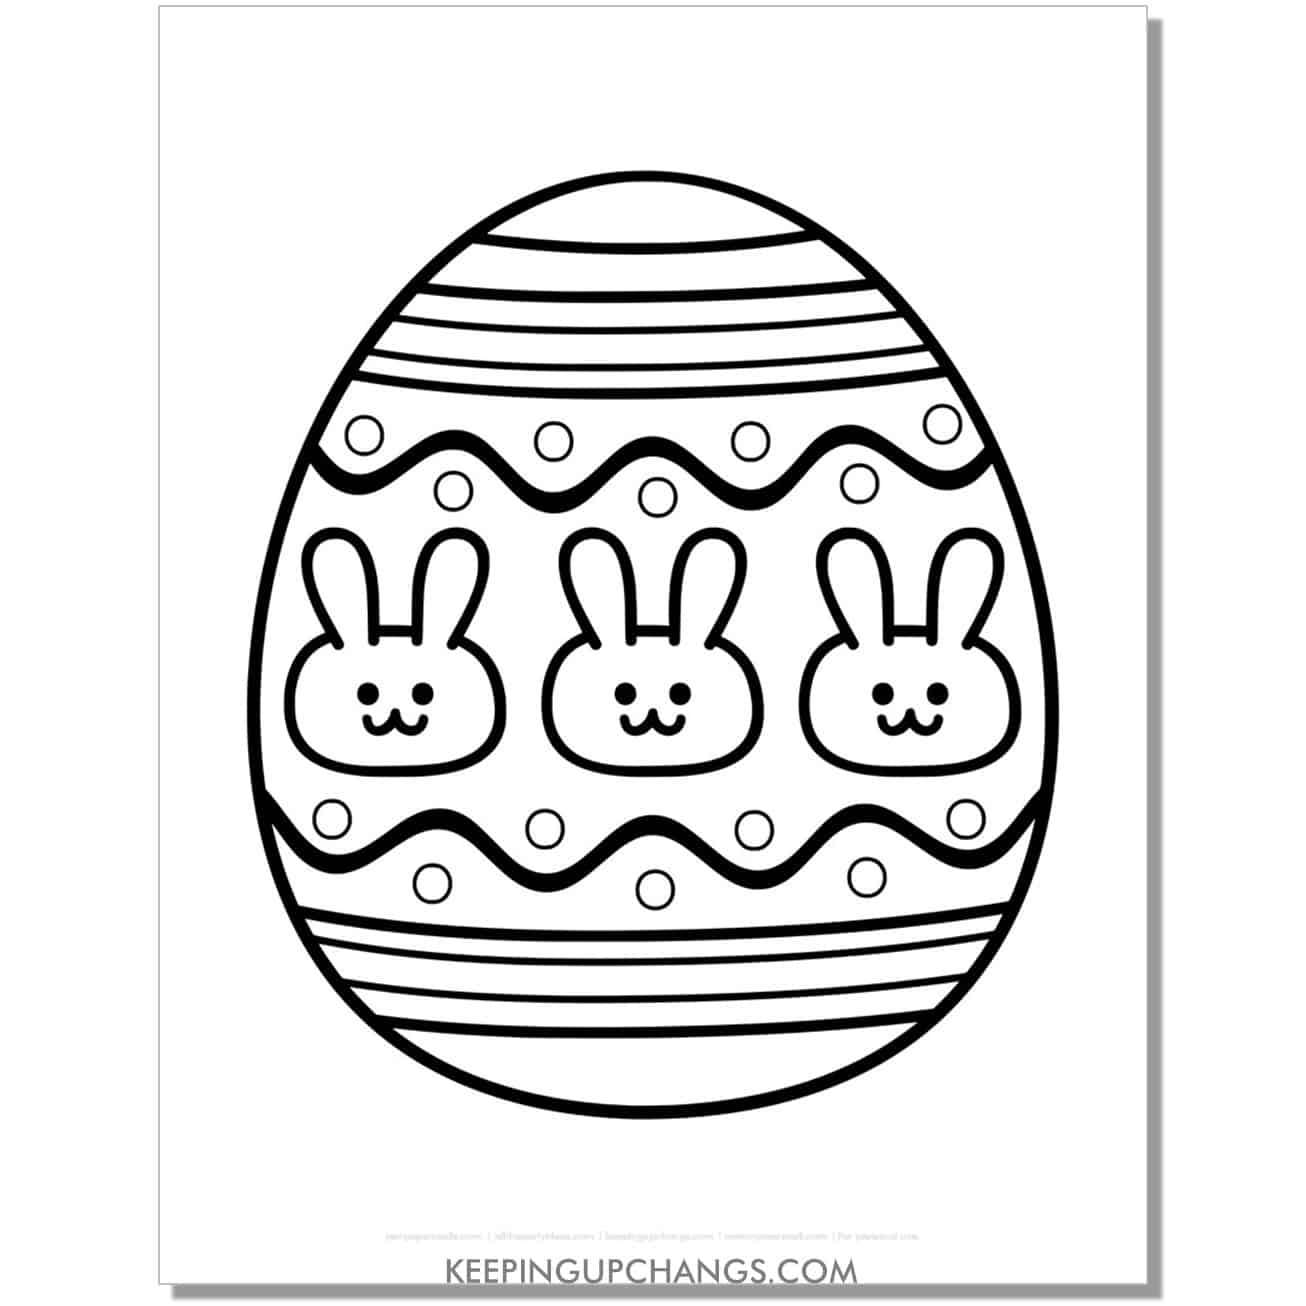 free large easter egg with bunny rabbit pattern coloring page, sheet.